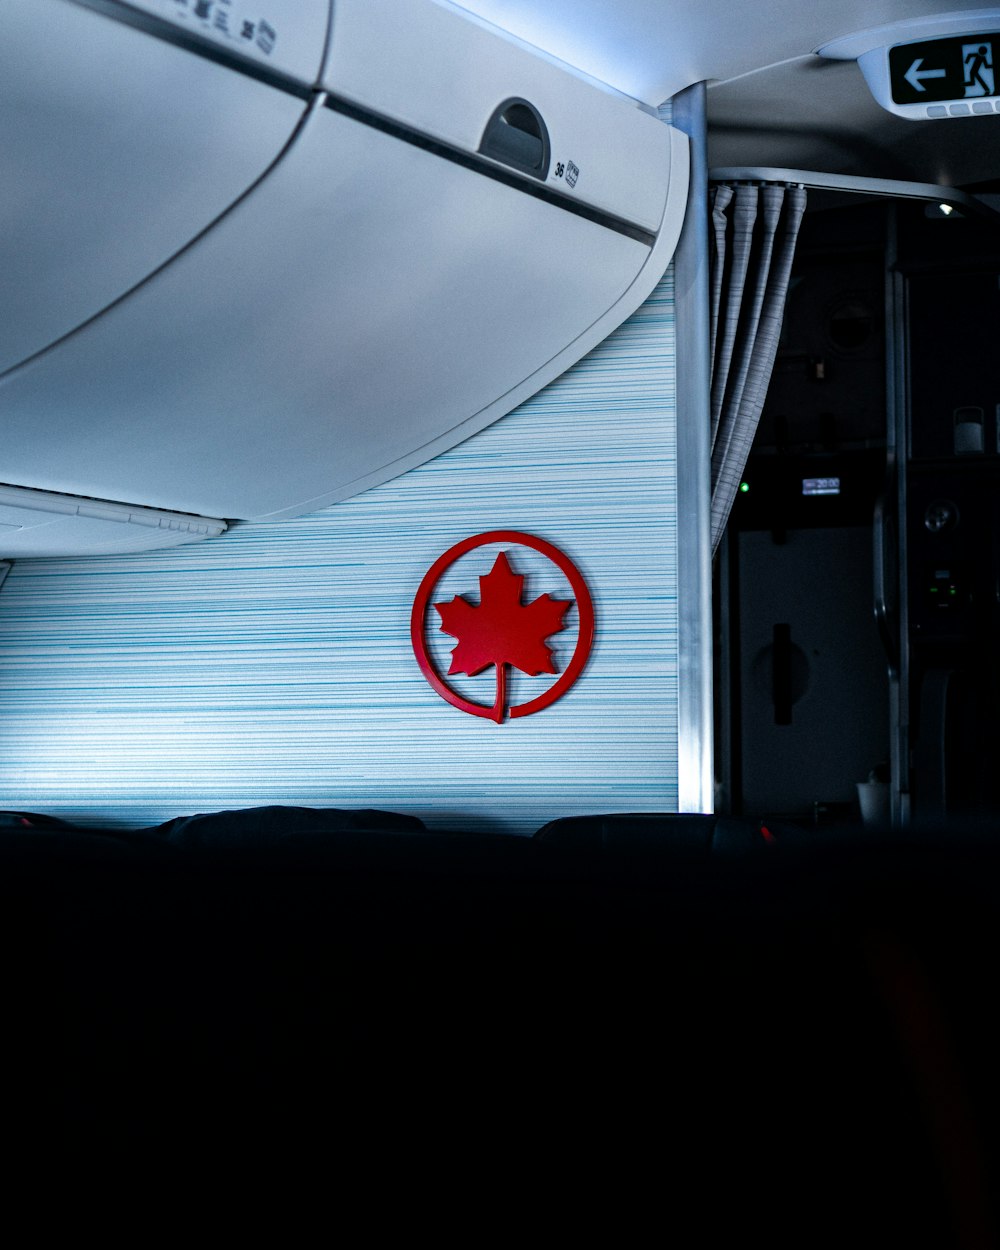 a canadian maple leaf on the side of an airplane